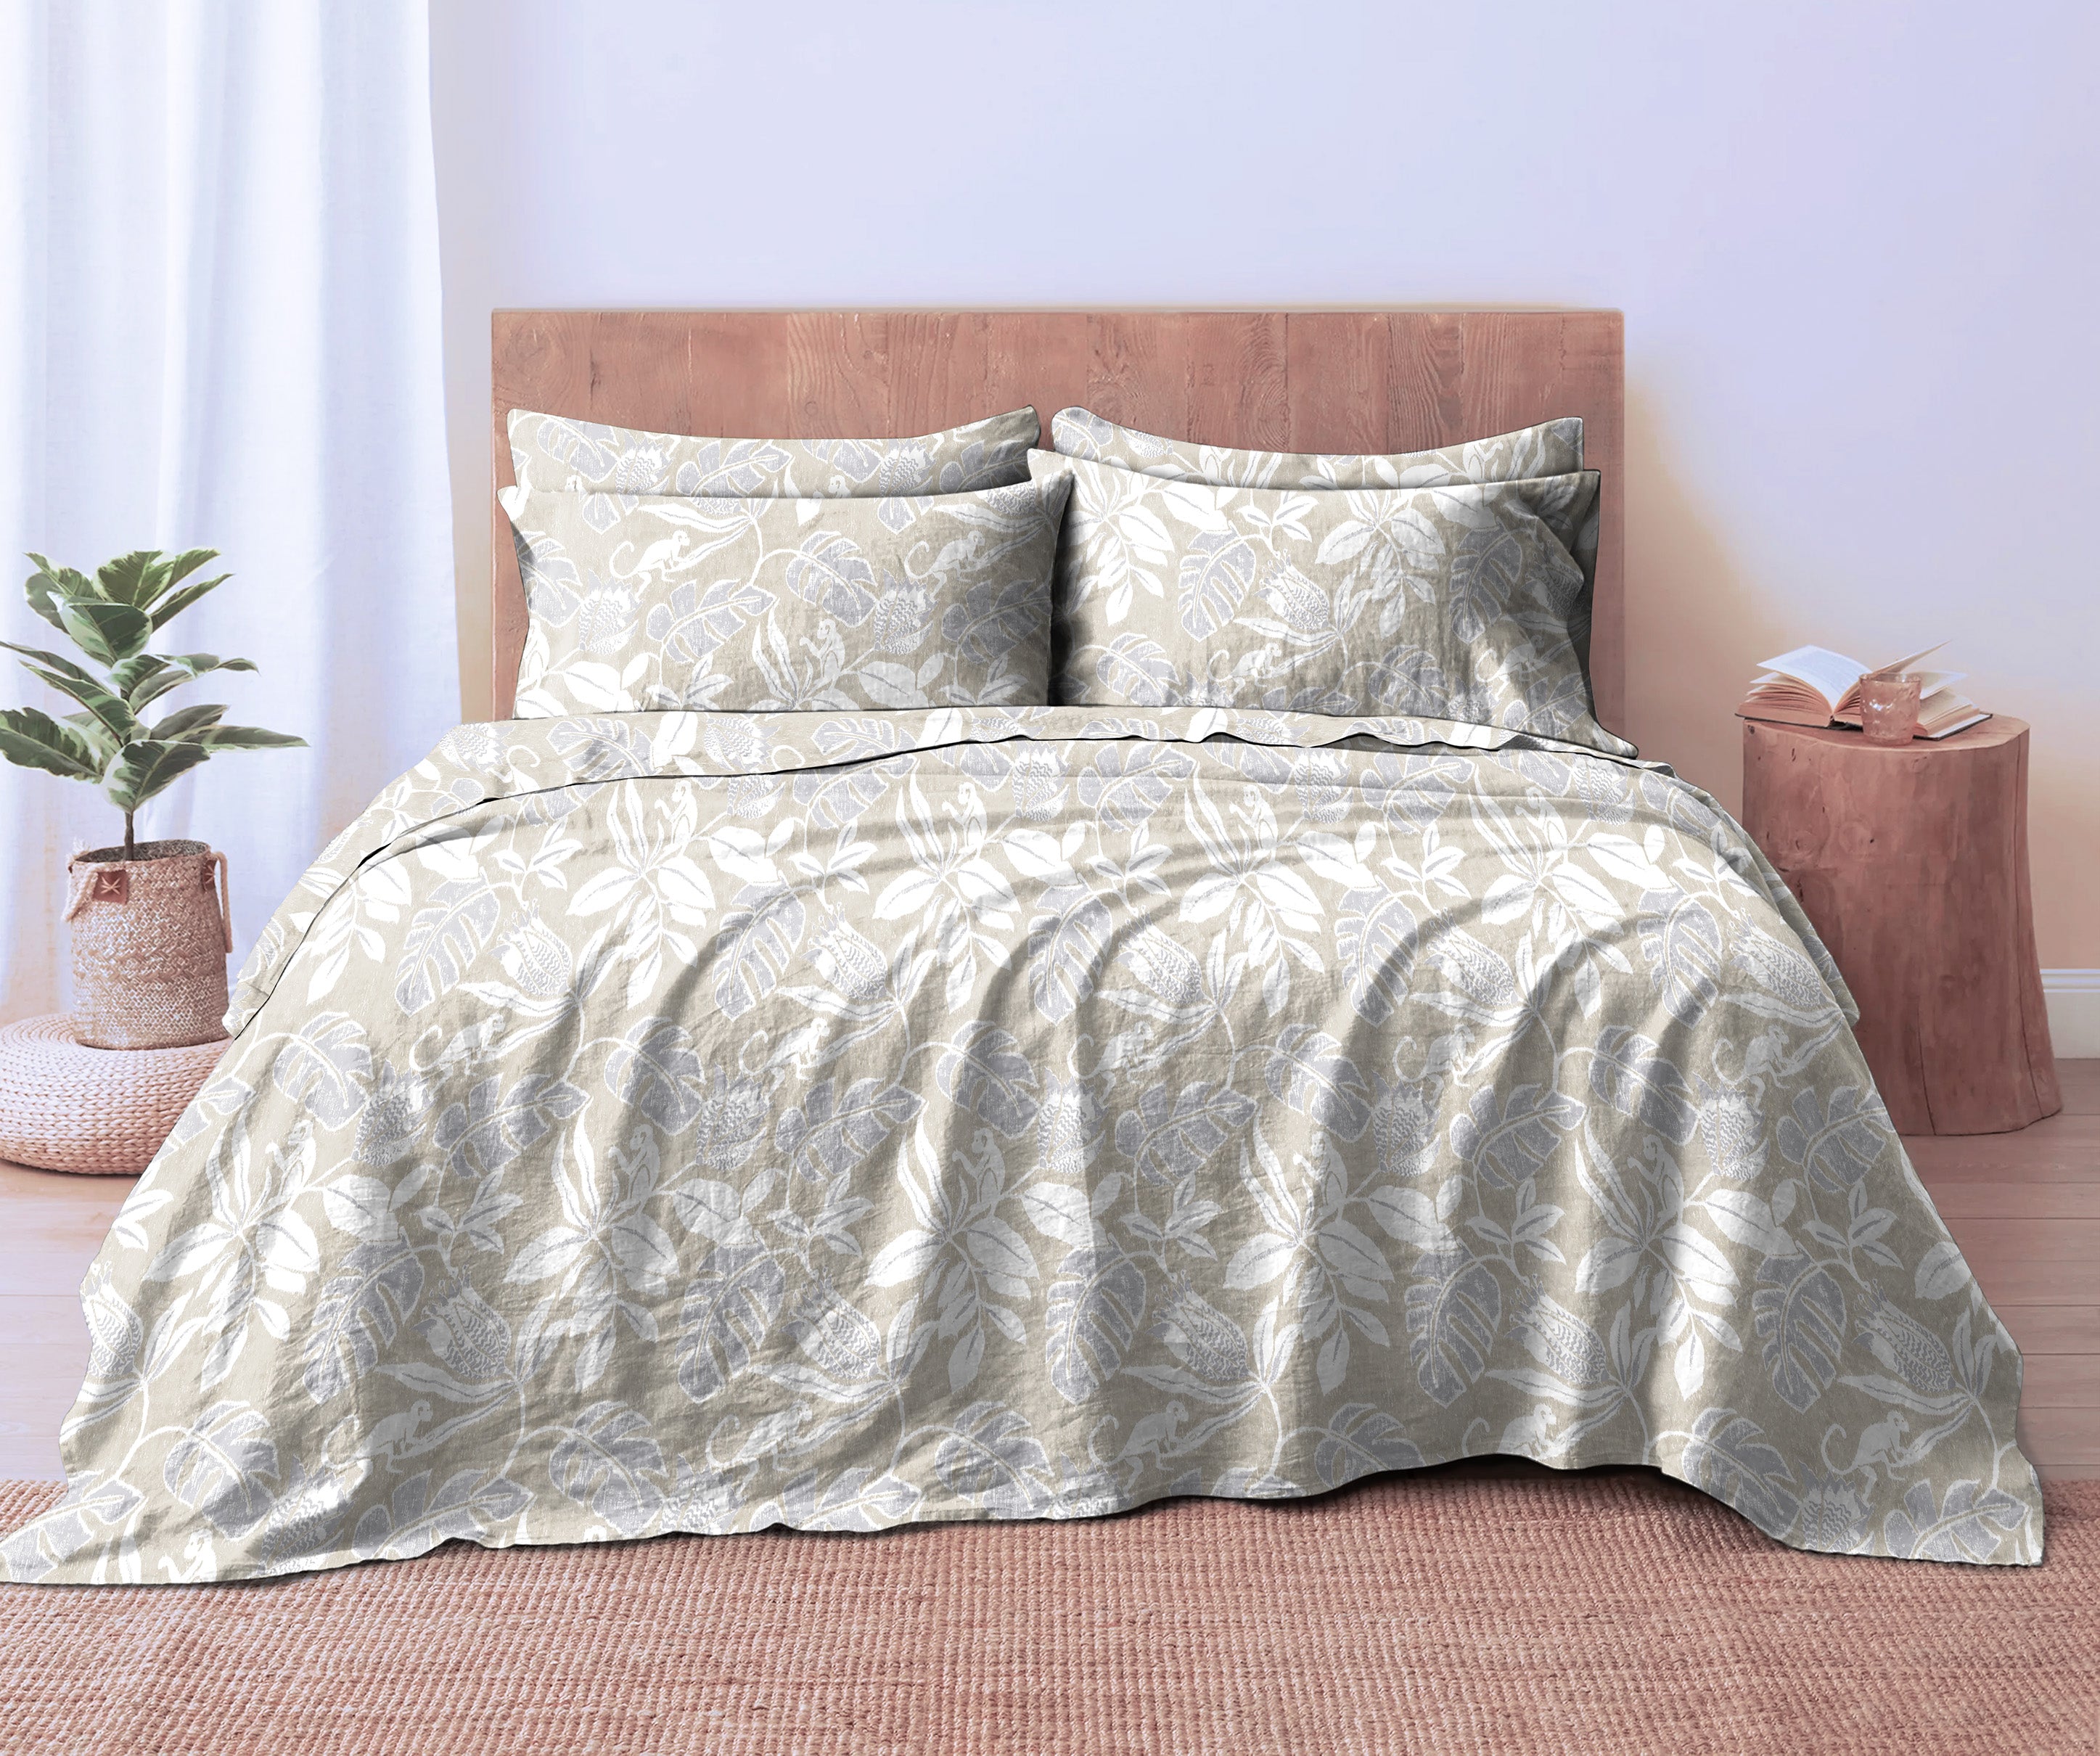 SAVANNA PUMICE BEDCOVER FOR DOUBLE BED WITH 2 PILLOWCOVERS KING SIZE (104" X 90")